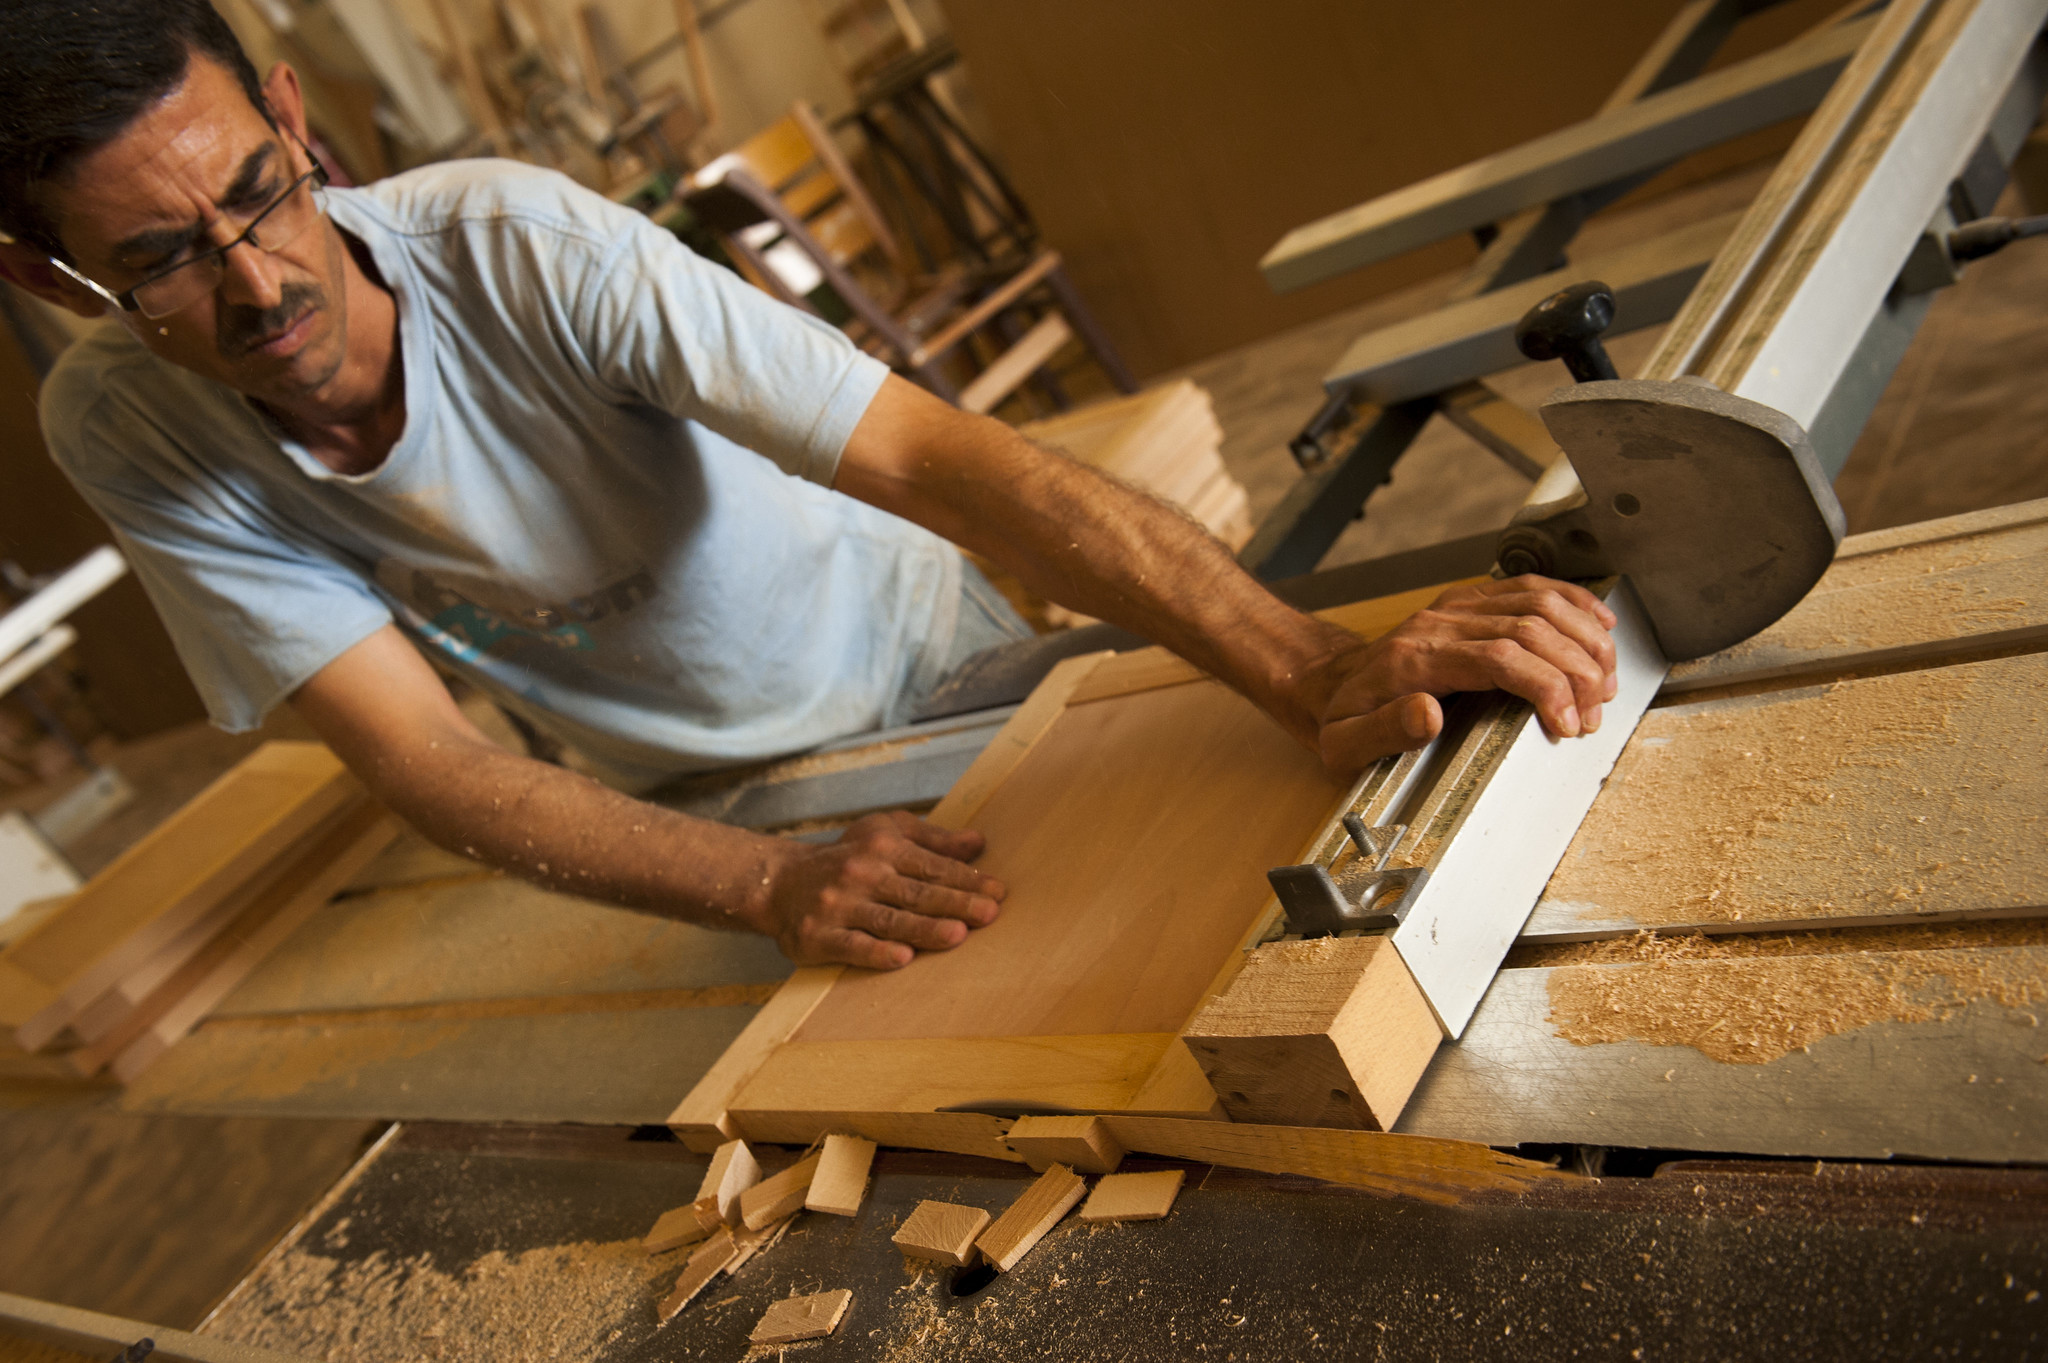 How to Reduce HSE Risks in The Furniture Industry